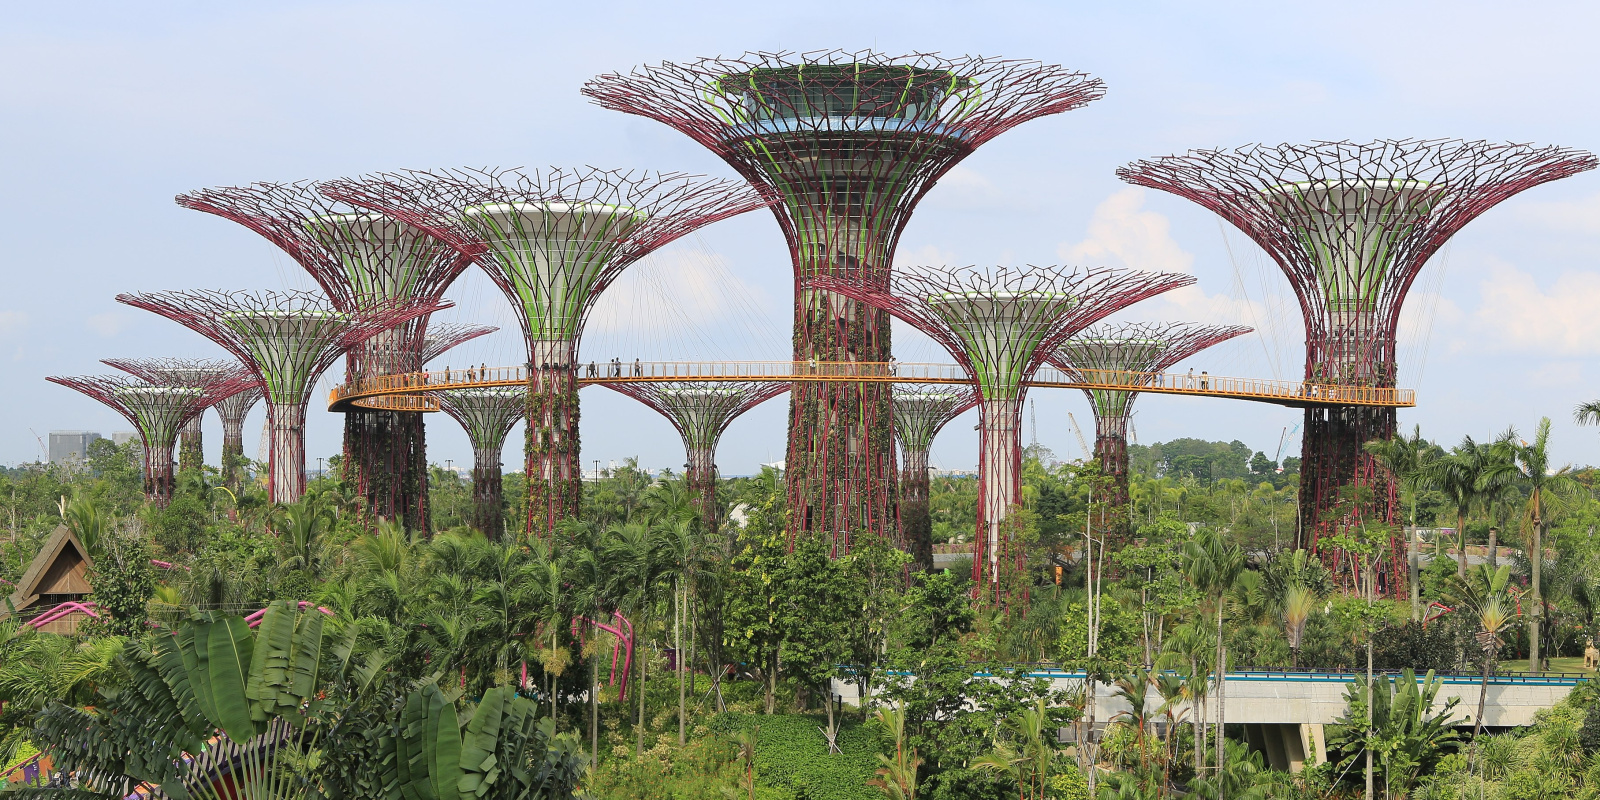 Panorama of the artificial supertrees in Singapore, huge constructions with reverse umbrella-shaped tops formed of twigs